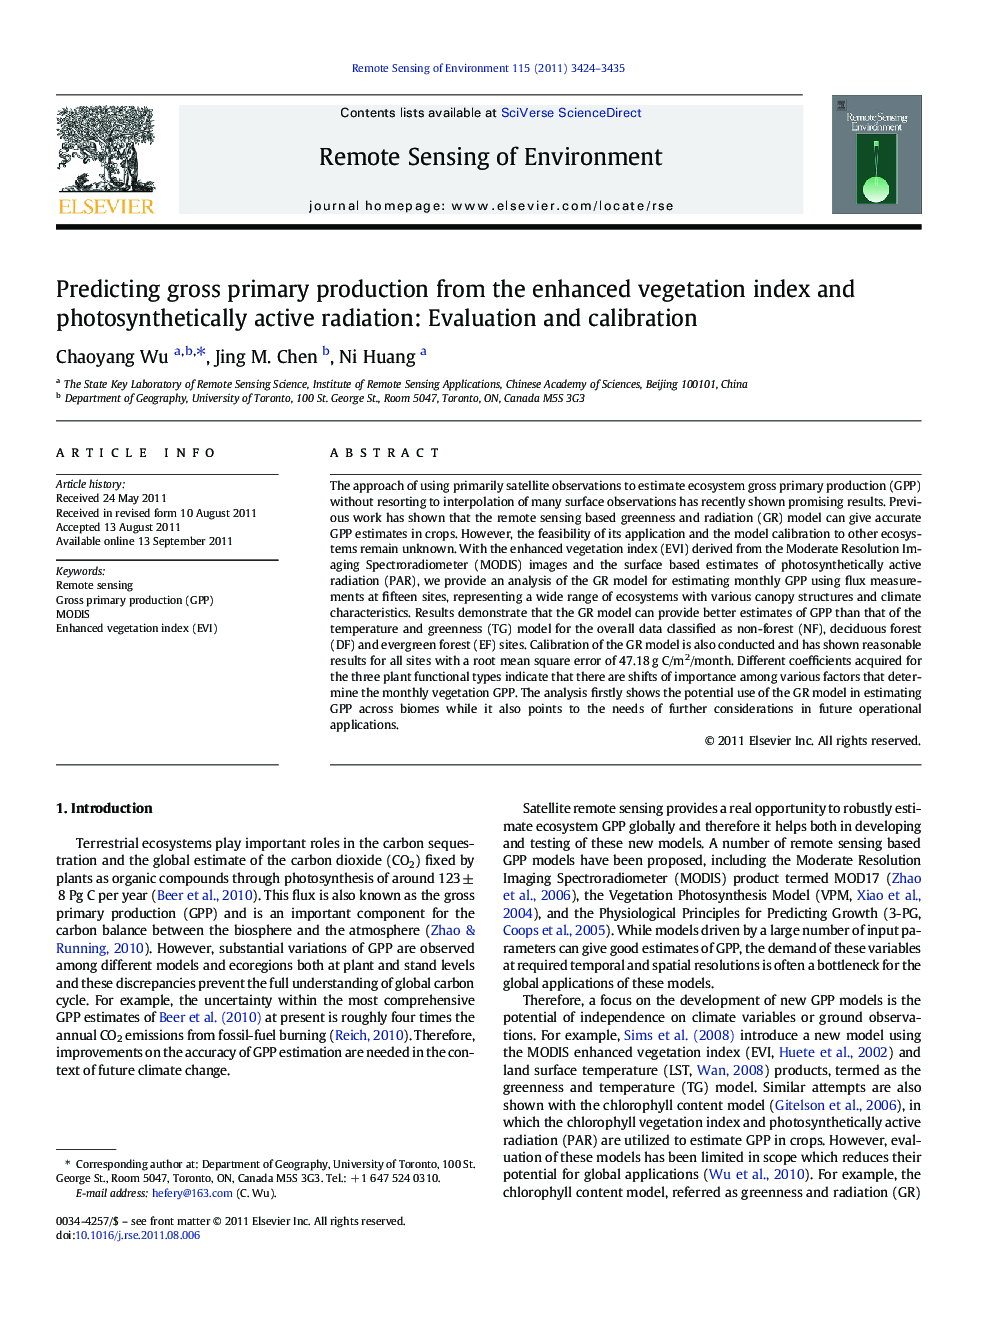 Predicting gross primary production from the enhanced vegetation index and photosynthetically active radiation: Evaluation and calibration